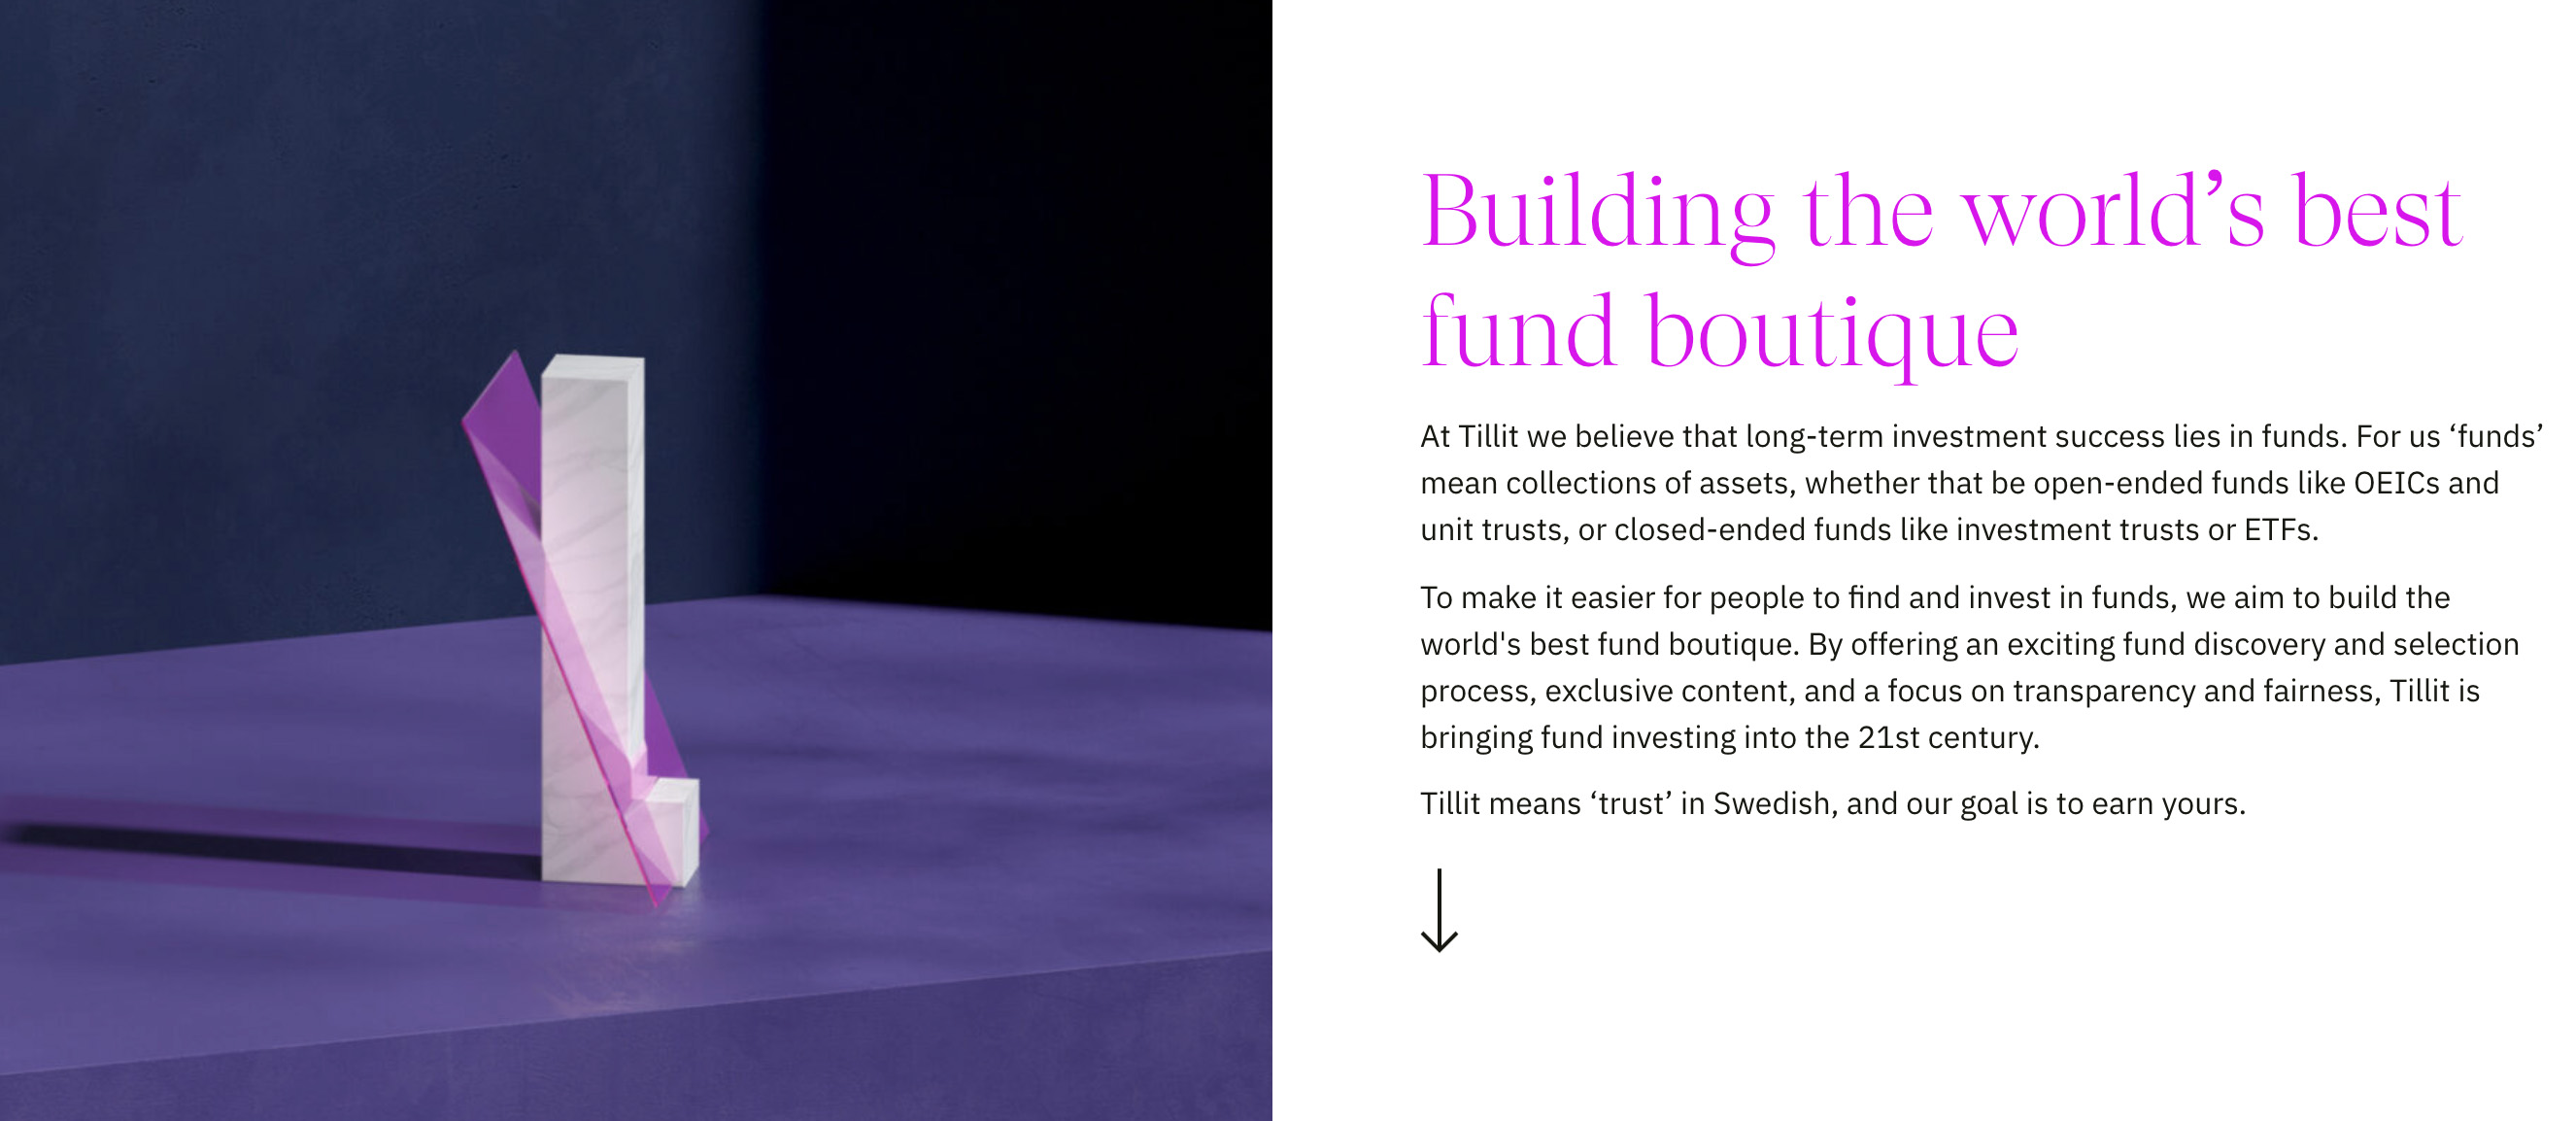 Tillit offers a bespoke fund discovery and selection progress